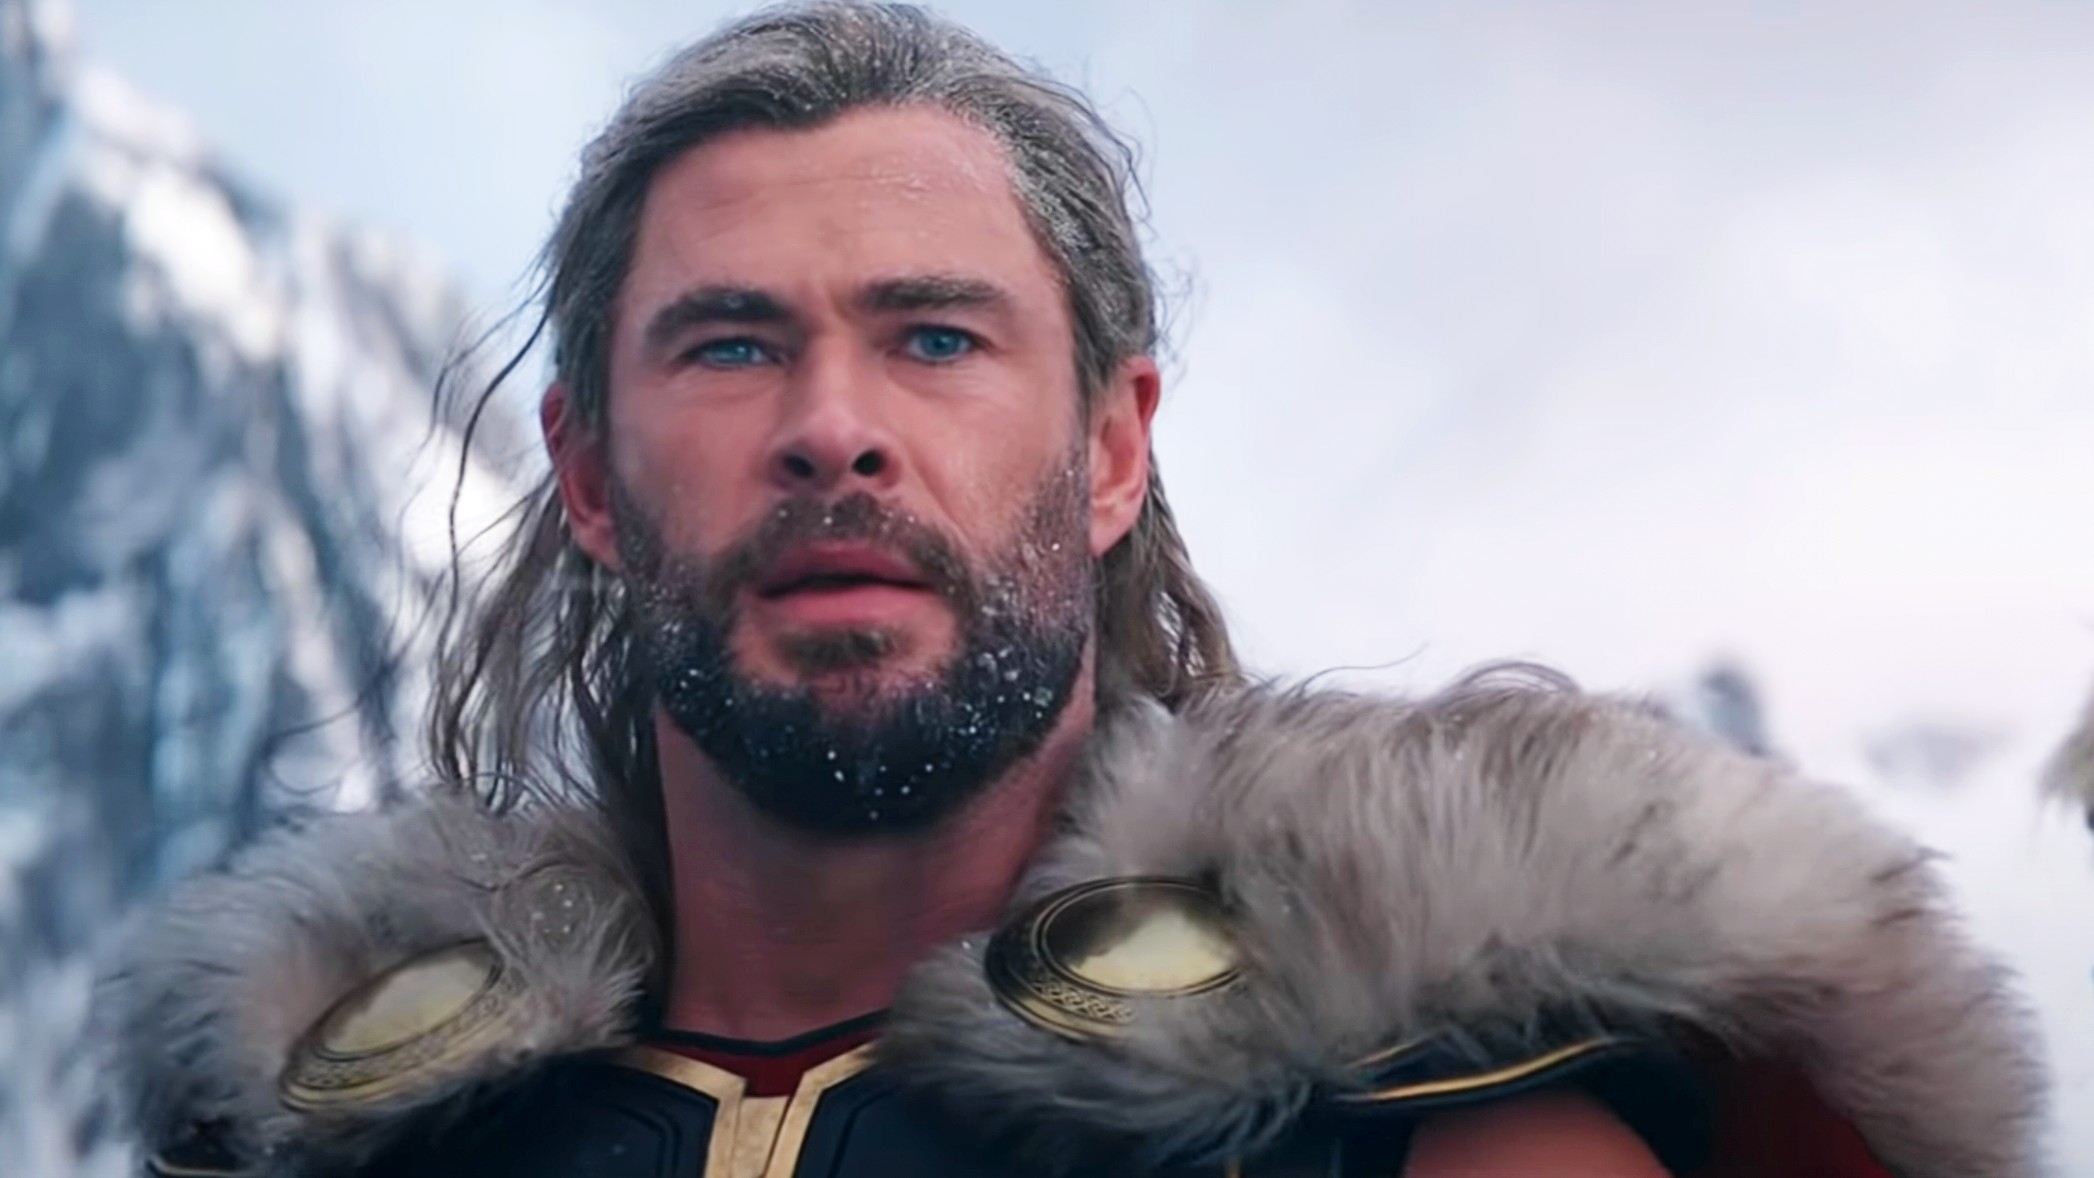 Thor: Love and Thunder currently sitting at 69% on Rotten Tomatoes